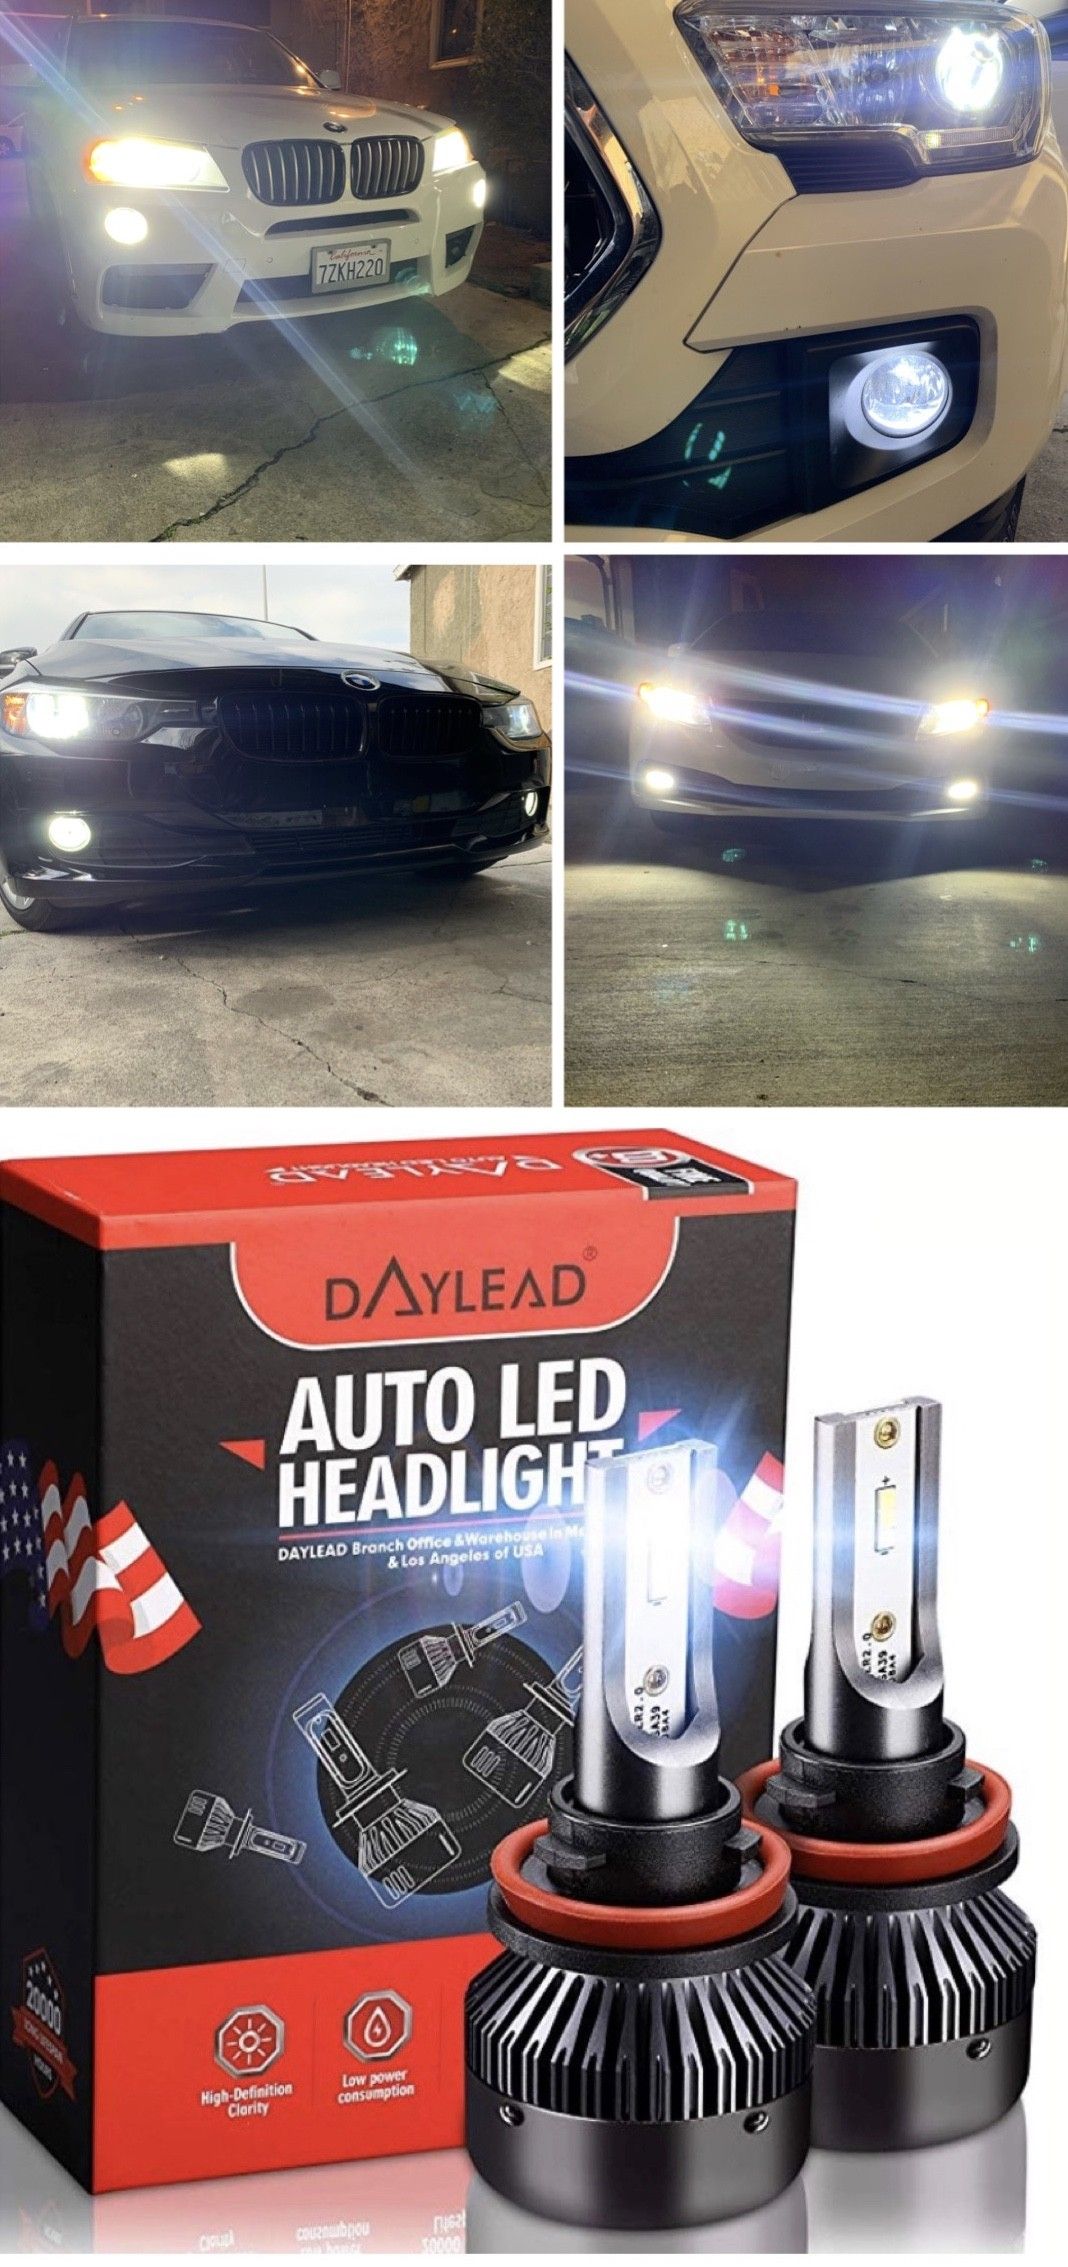 Super bright led headlights or foglights 25$ plug and play free license plate LEDs with purchase